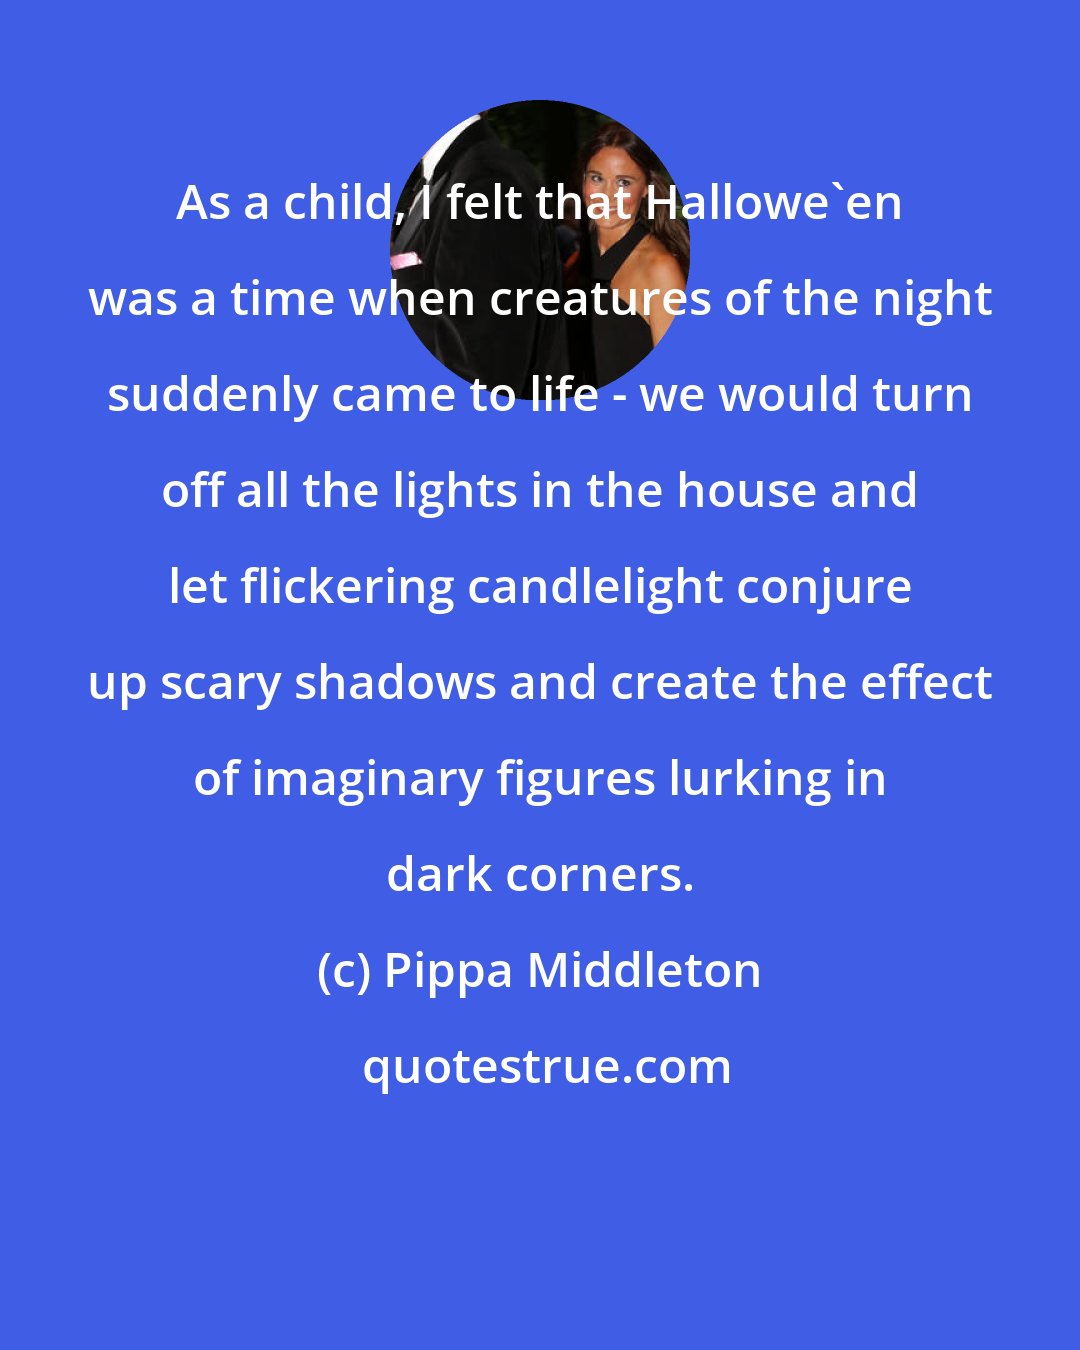 Pippa Middleton: As a child, I felt that Hallowe'en was a time when creatures of the night suddenly came to life - we would turn off all the lights in the house and let flickering candlelight conjure up scary shadows and create the effect of imaginary figures lurking in dark corners.